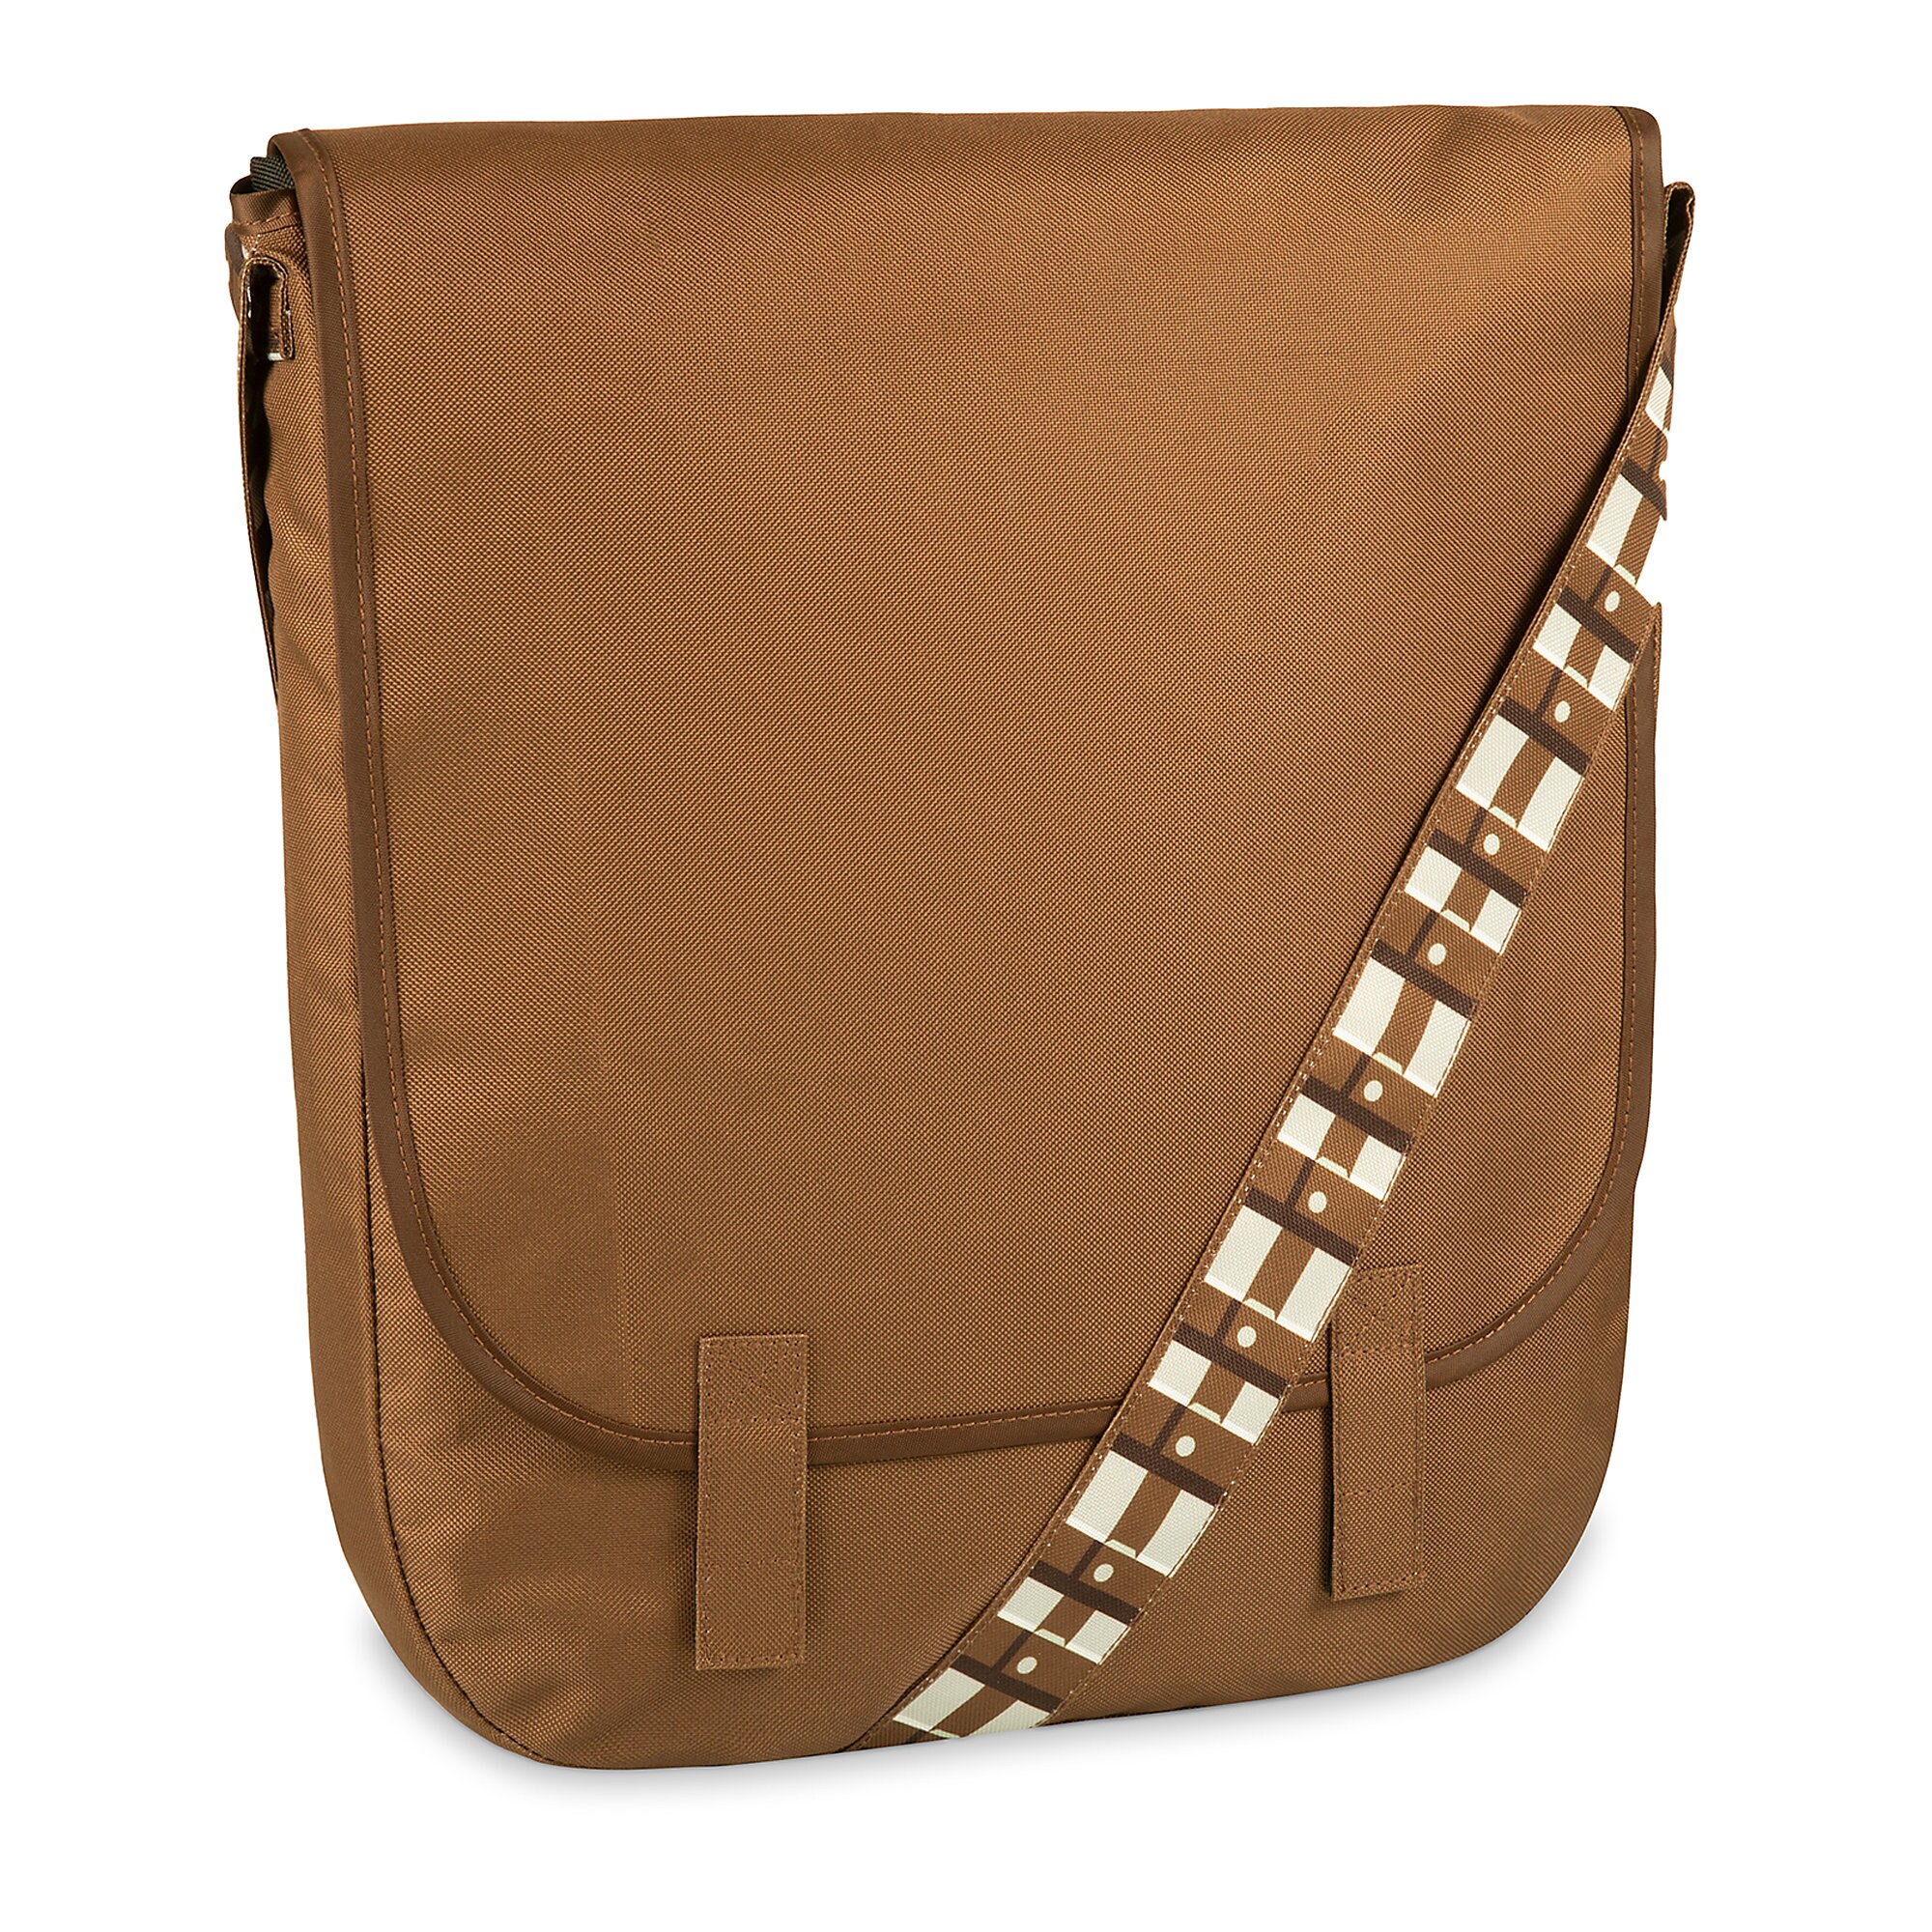 Millennium Falcon Picnic Blanket and Chewbacca Messenger Bag - Star Wars